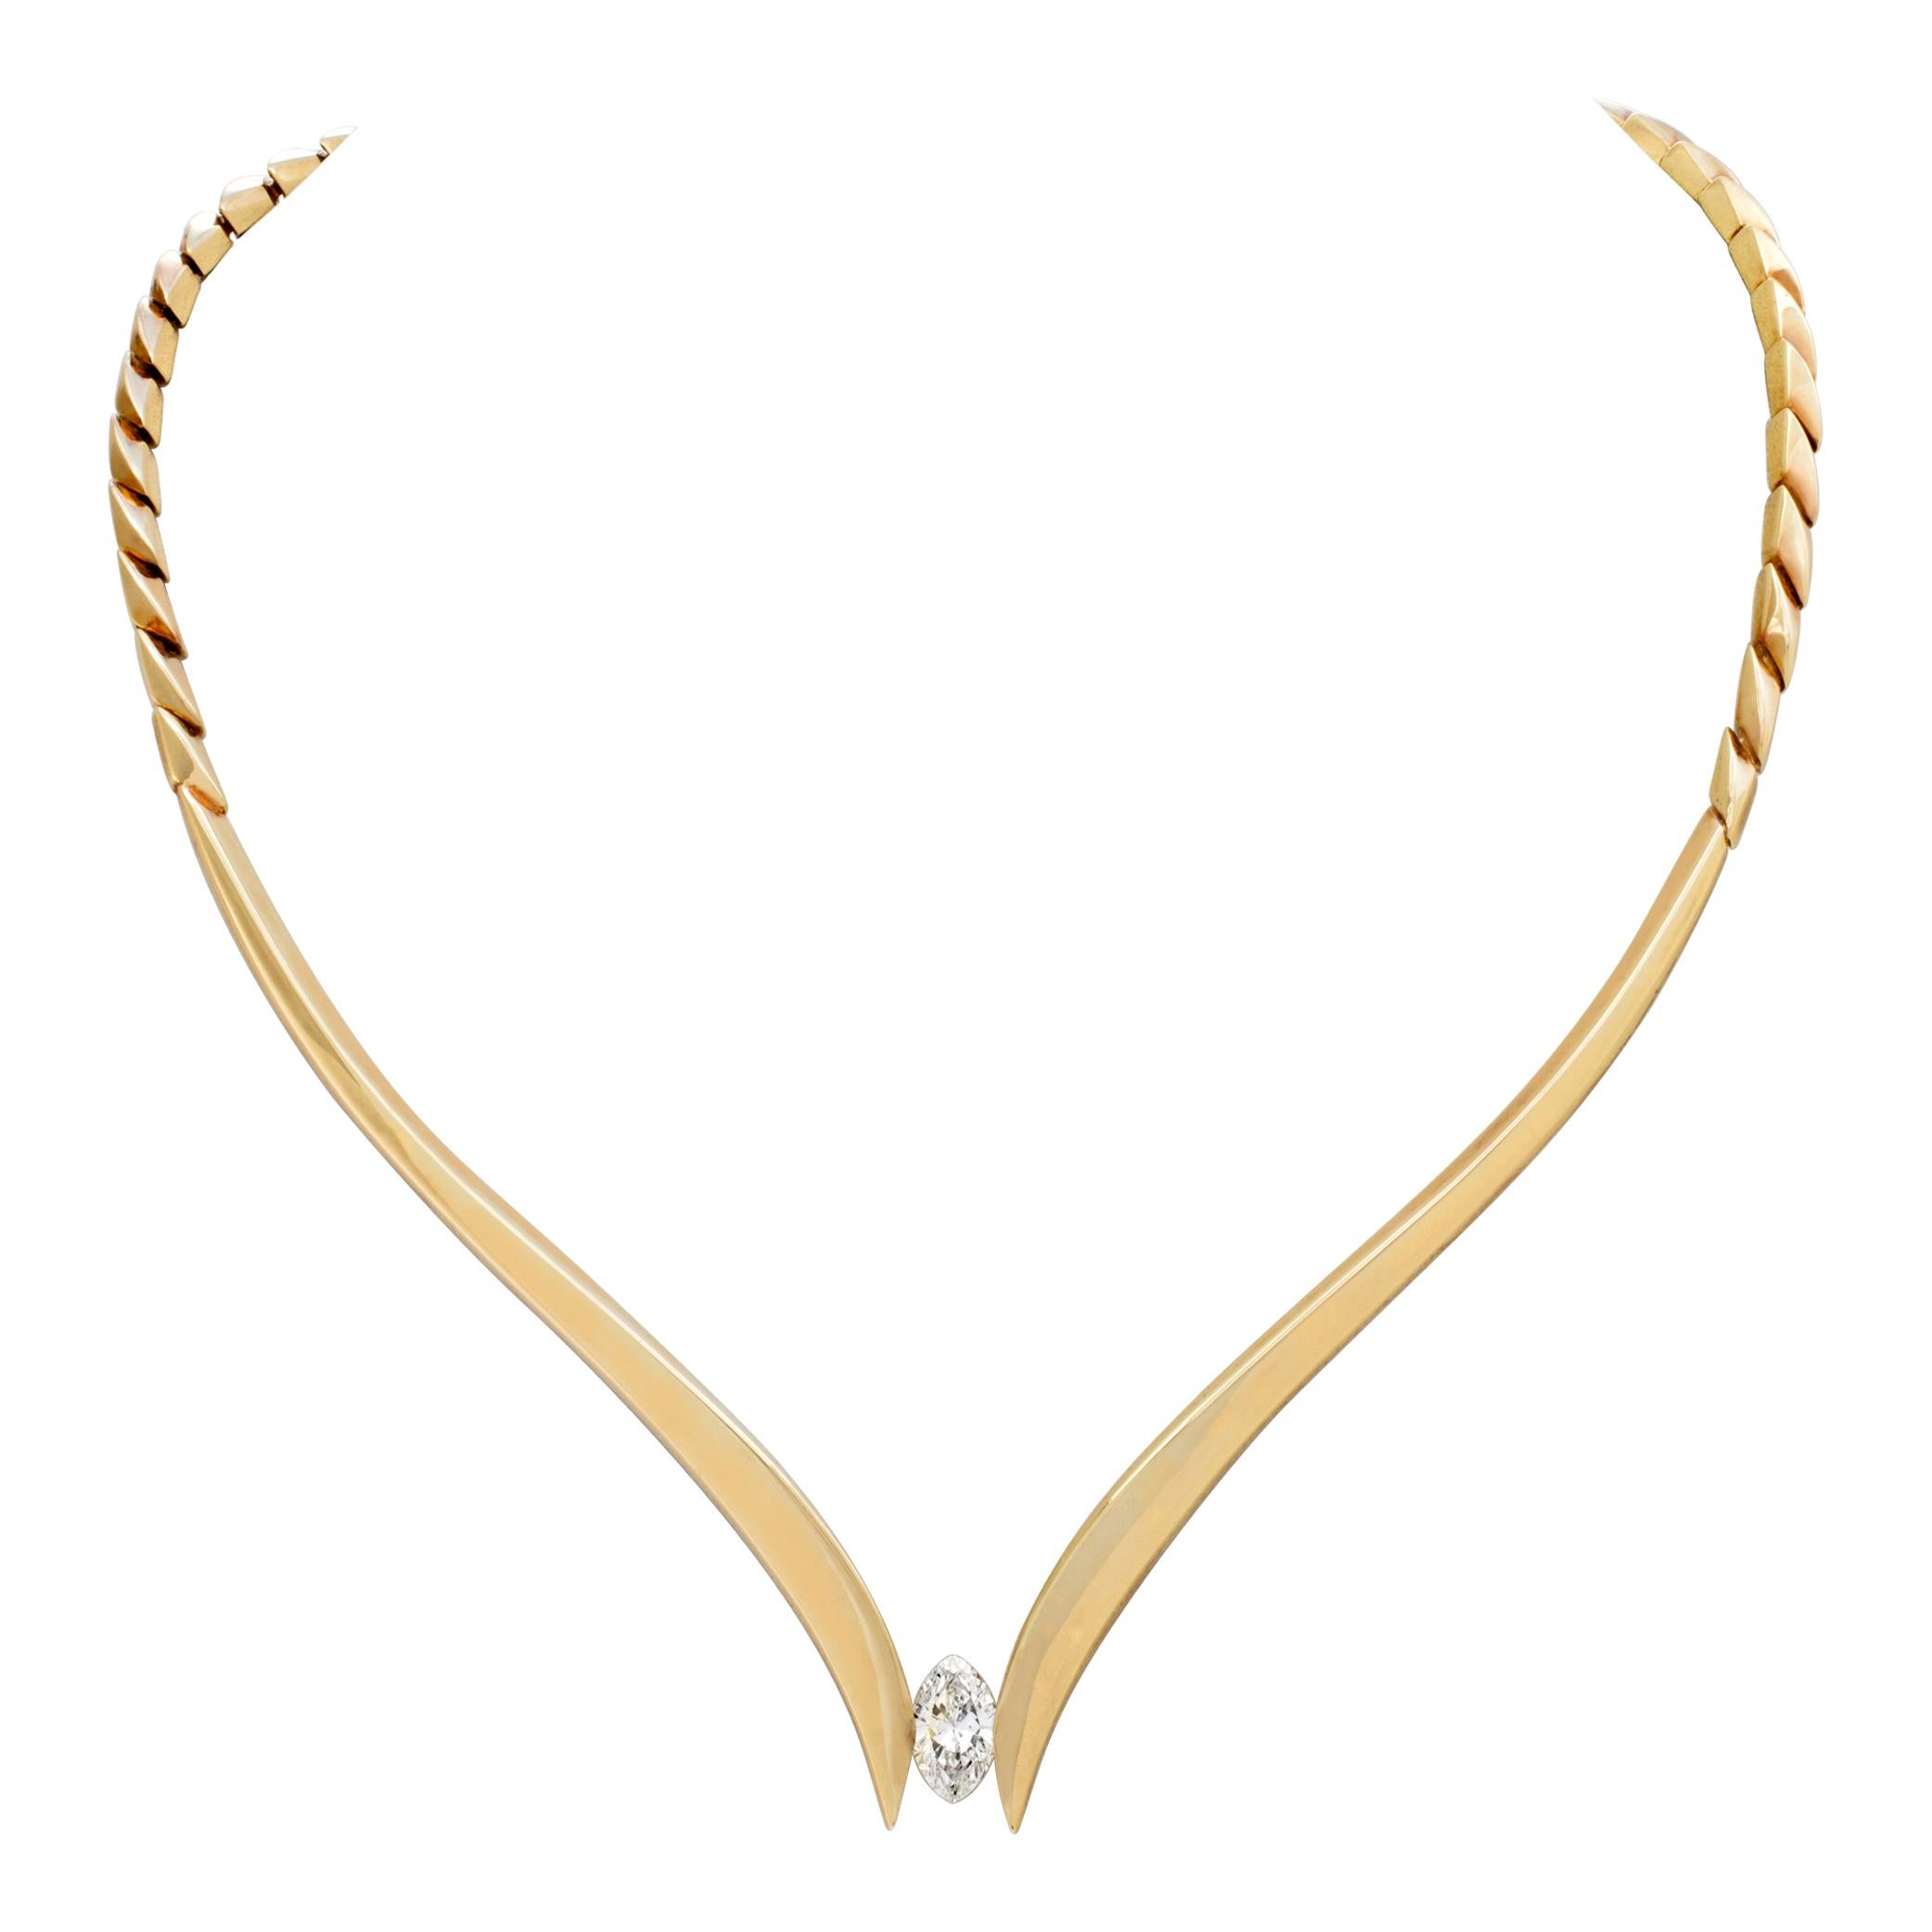 Designer Jose Hess, solitaire marquise diamond 14k yellow gold necklace